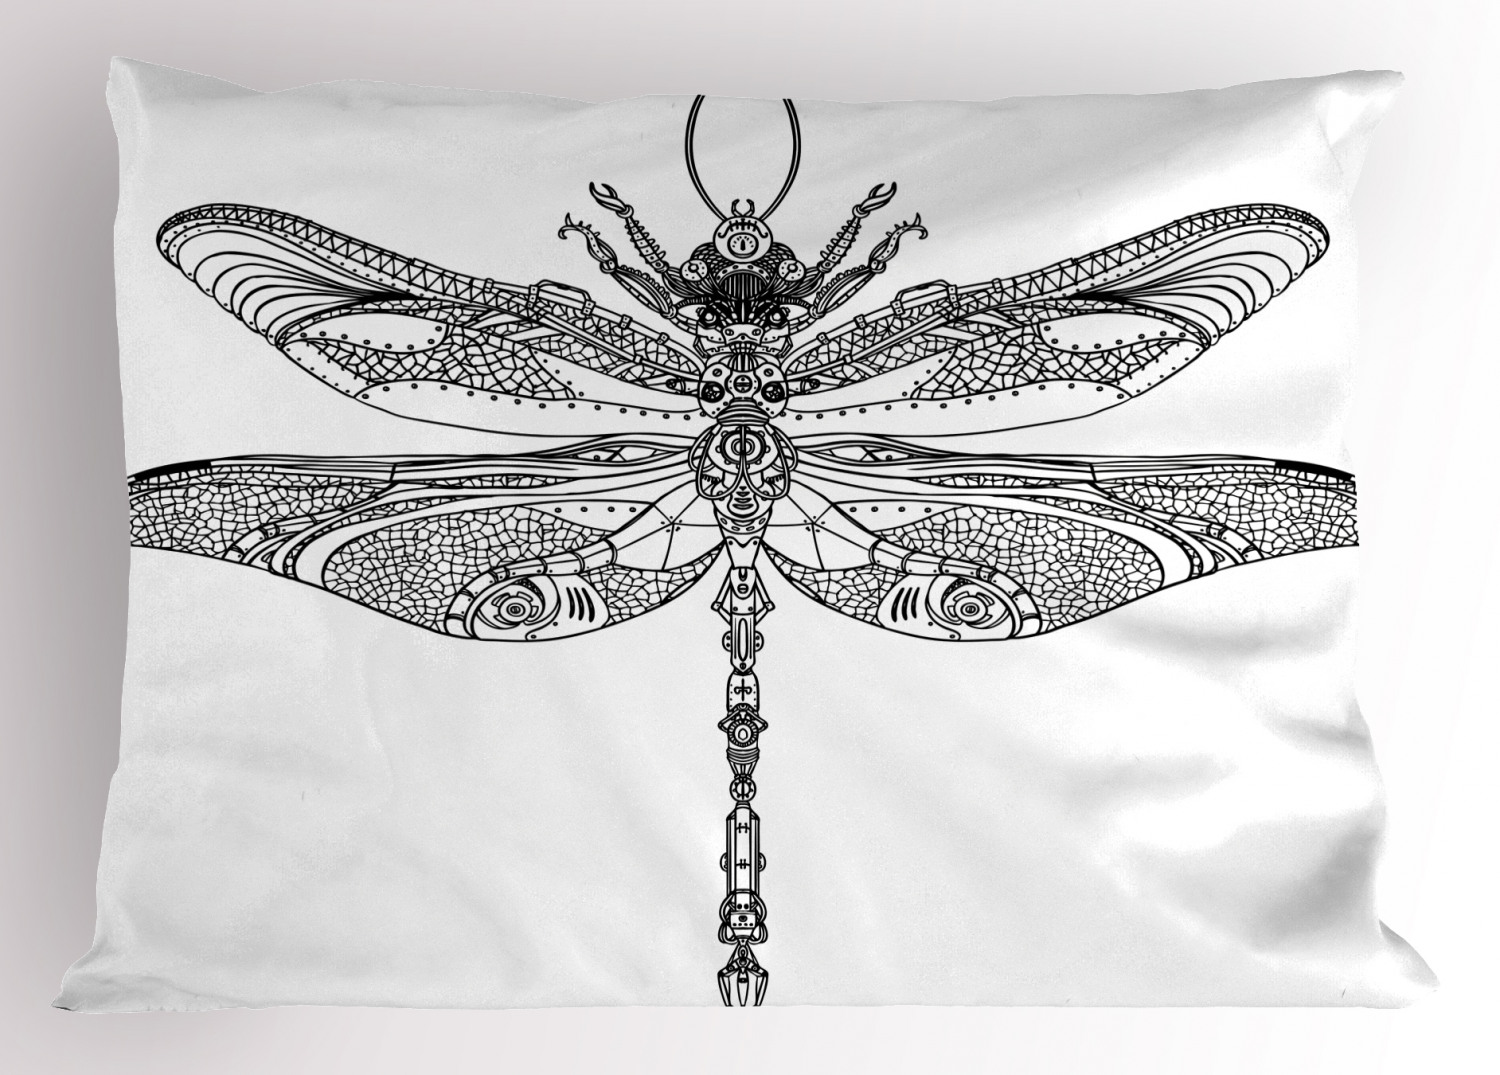 Dragonfly Wings Pillow Sham Decorative Pillowcase 3 Sizes Bedroom Decoration 